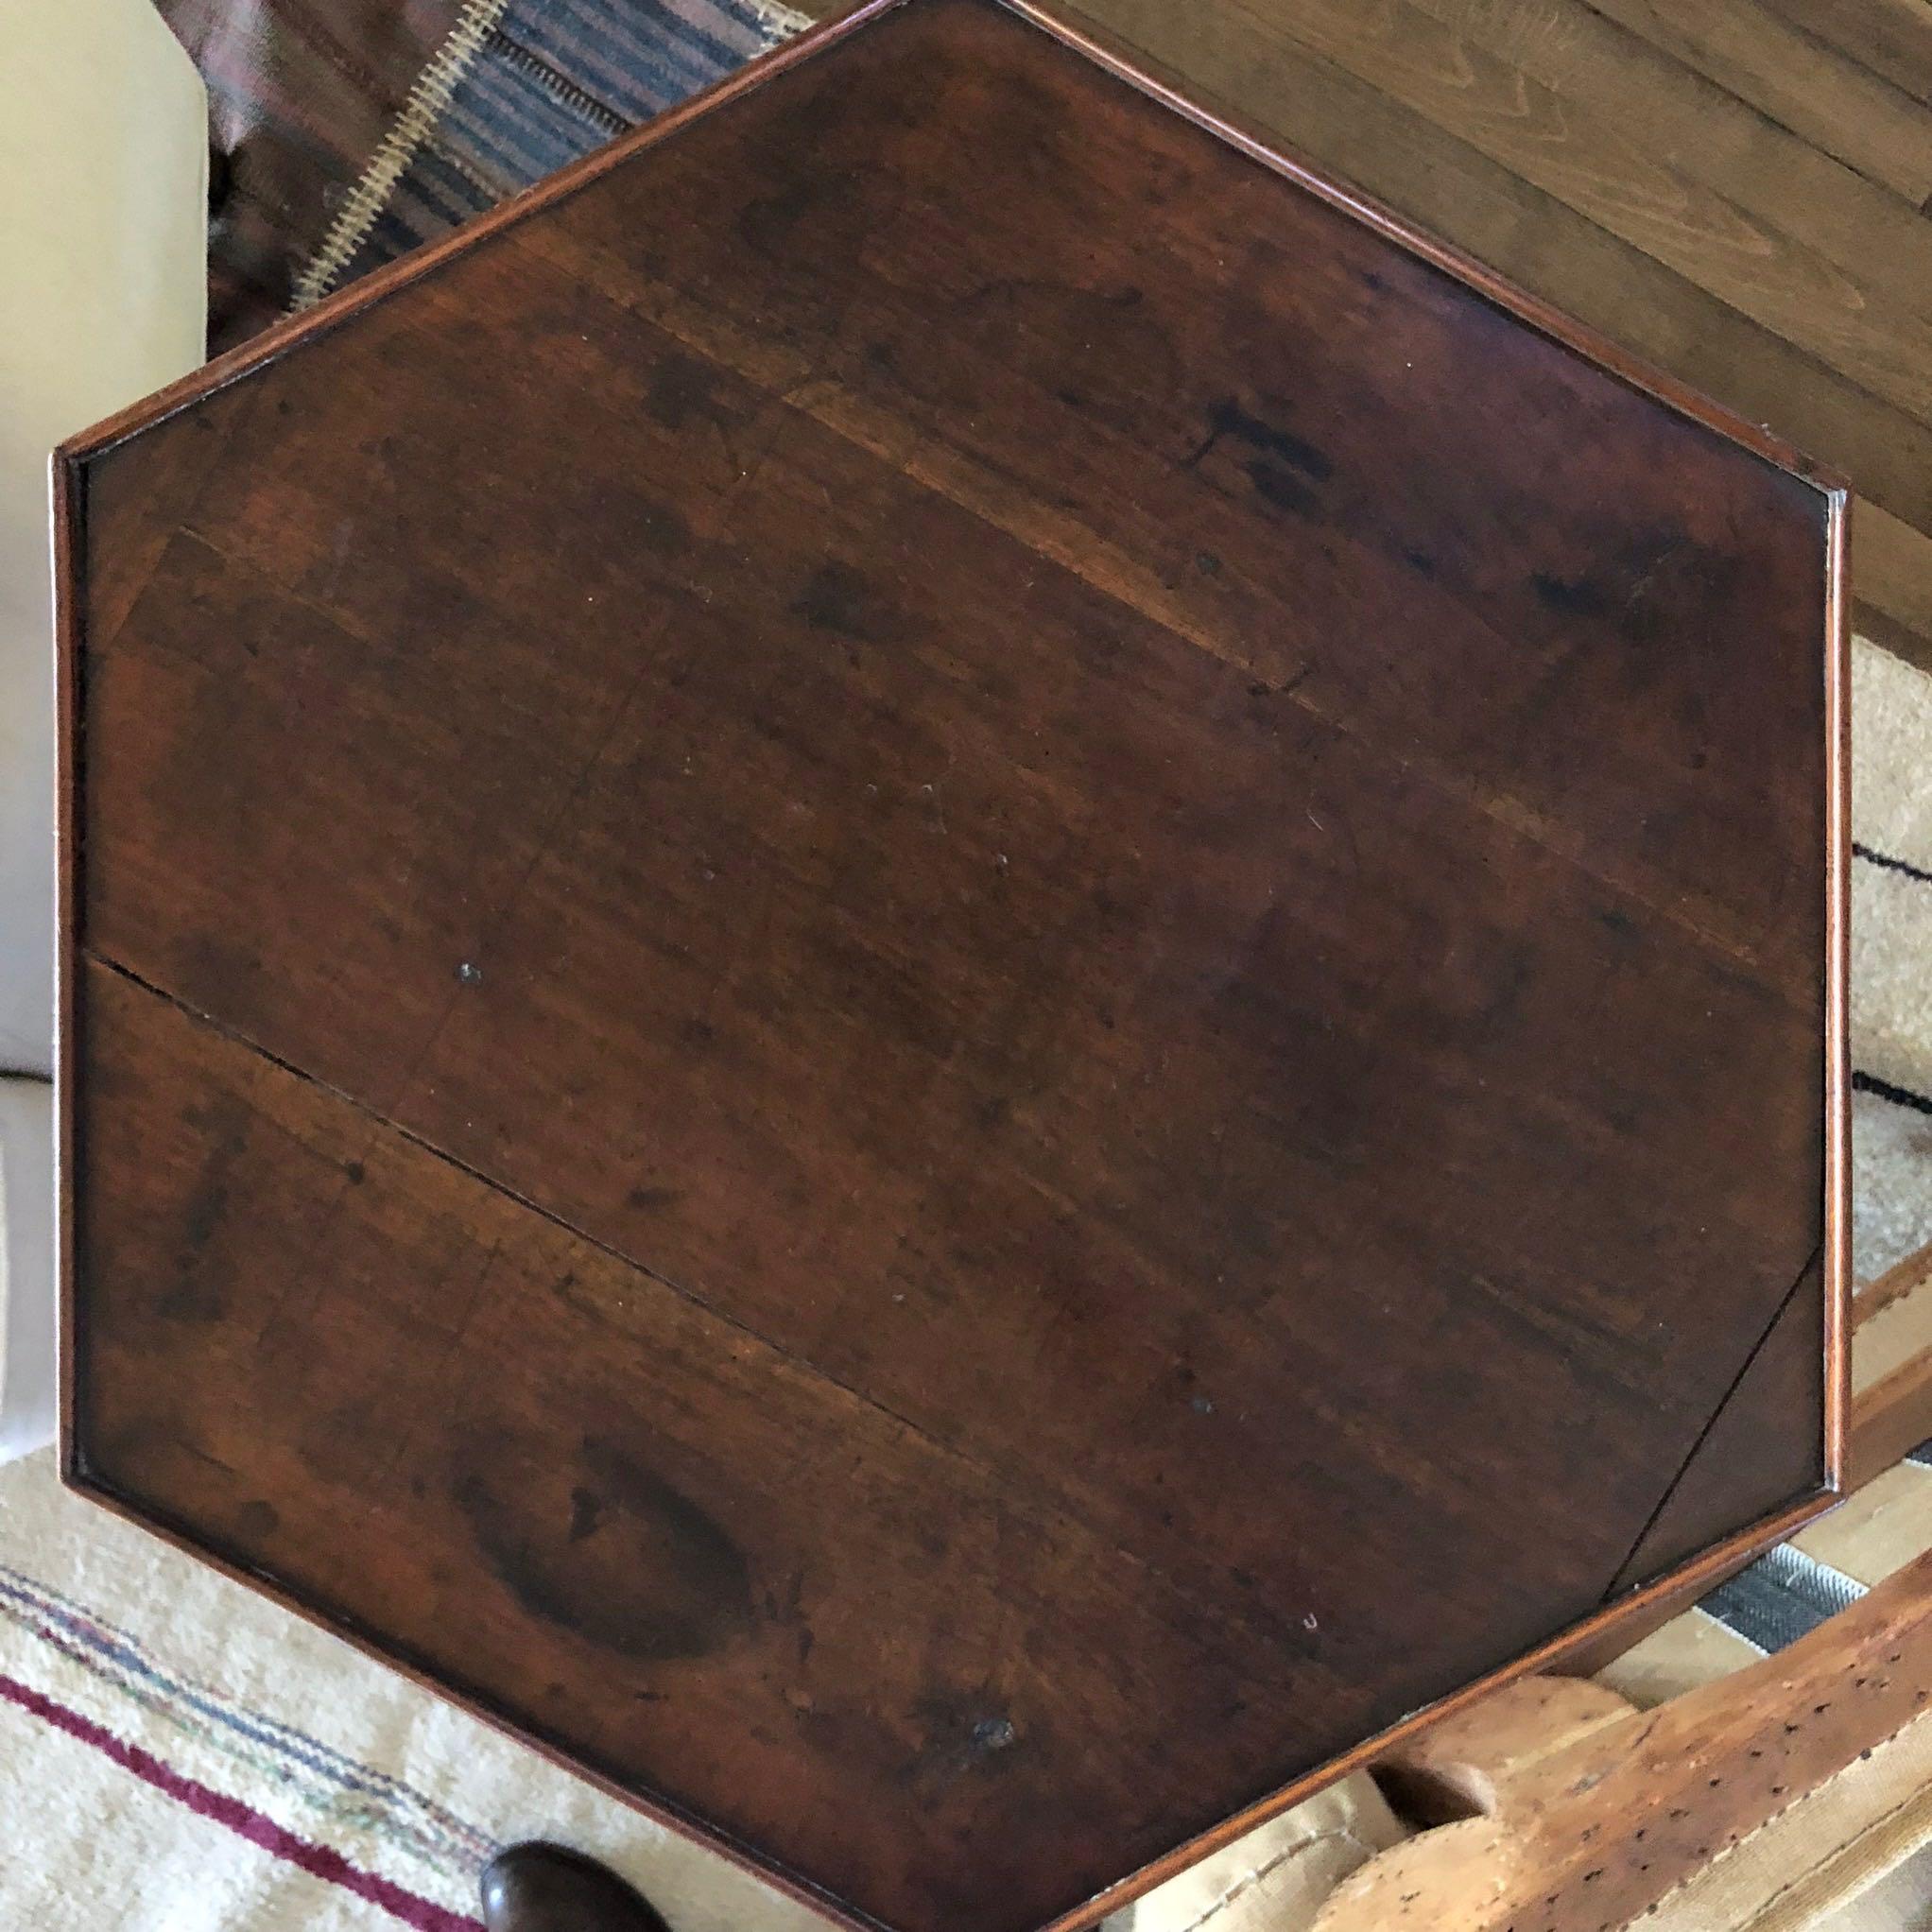 18th-century English octagonal wooden side or occasional table. This lovely Georgian piece features an octagonal top mounted on three winged legs and a small octagonal lower shelf. Delicate yet sturdy and classic, the piece would work in a variety